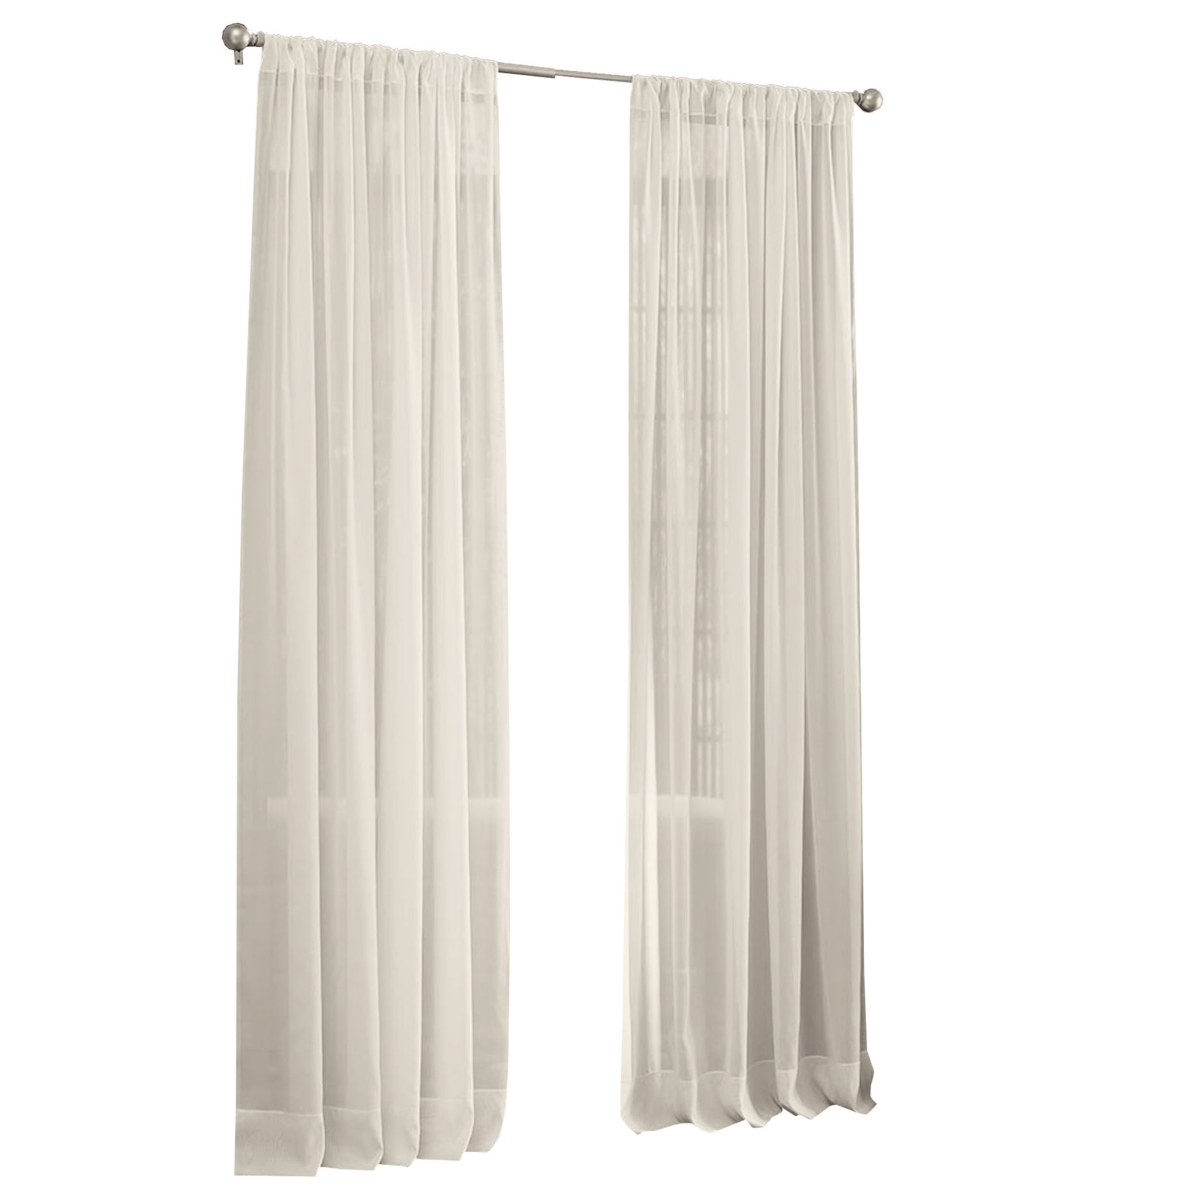 Voiledrap-118x240-ivory Sheer Voile Drape Panel, Ivory - 118 X 240 In.